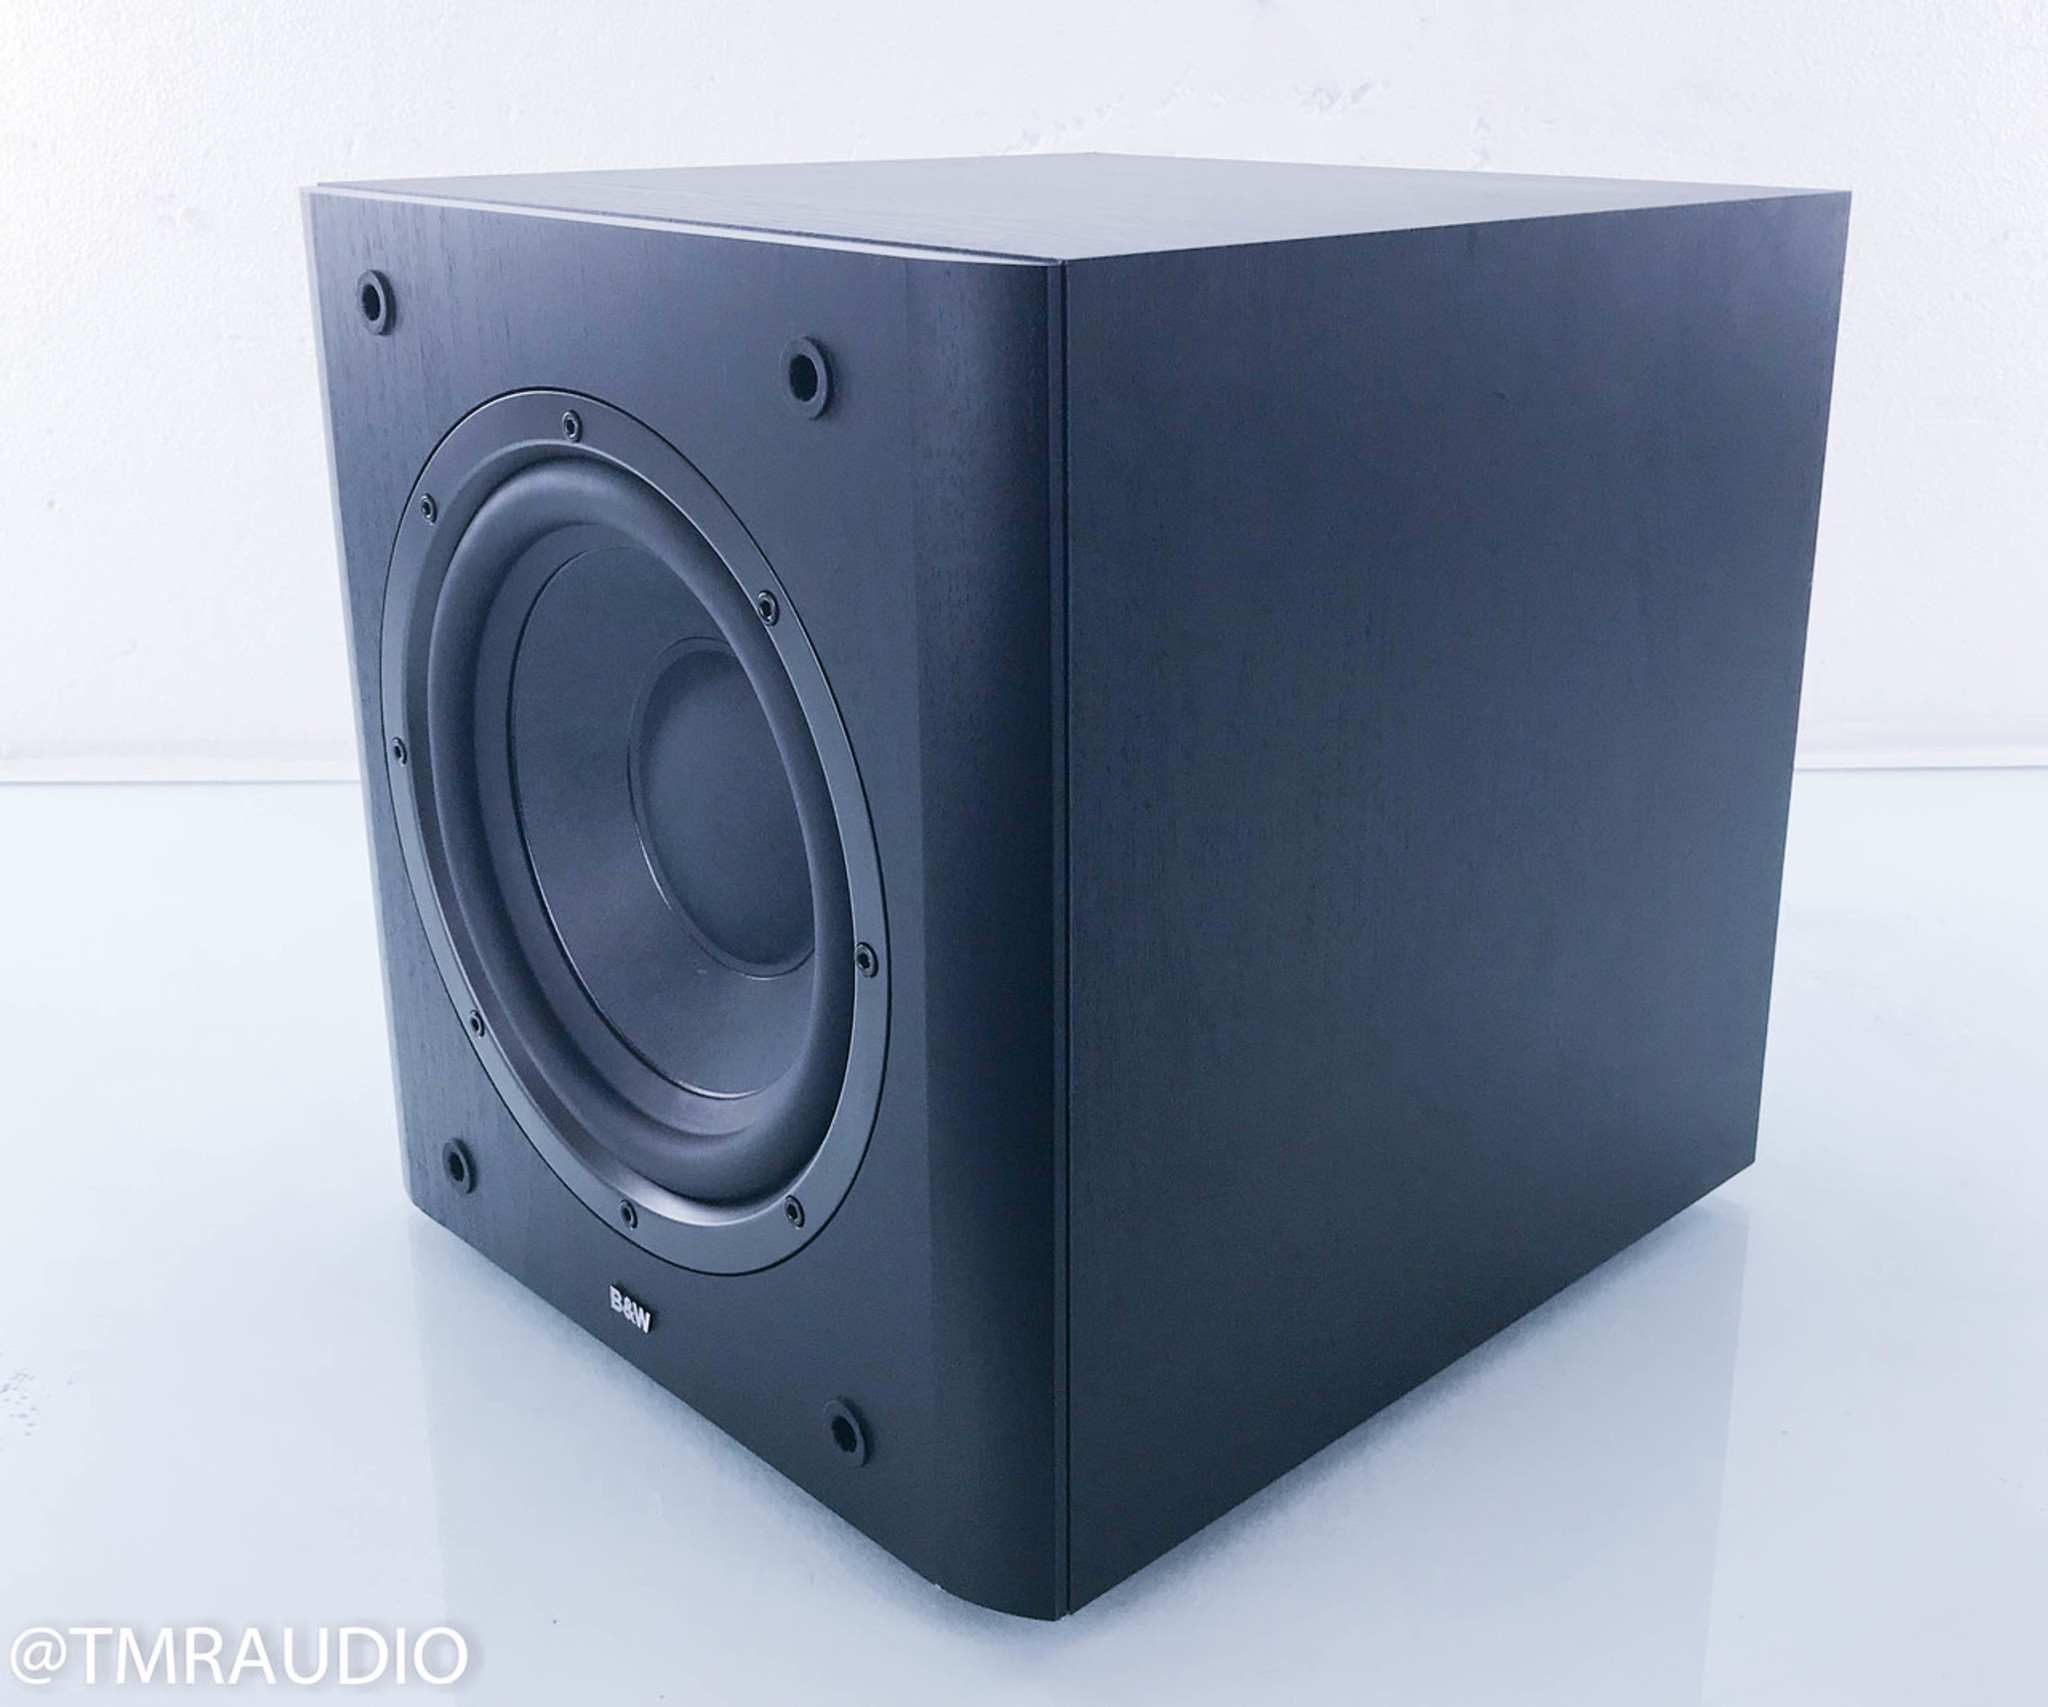 B&W ASW600 Powered Subwoofer; Bowers & Wilkins ASW-600 - The Room